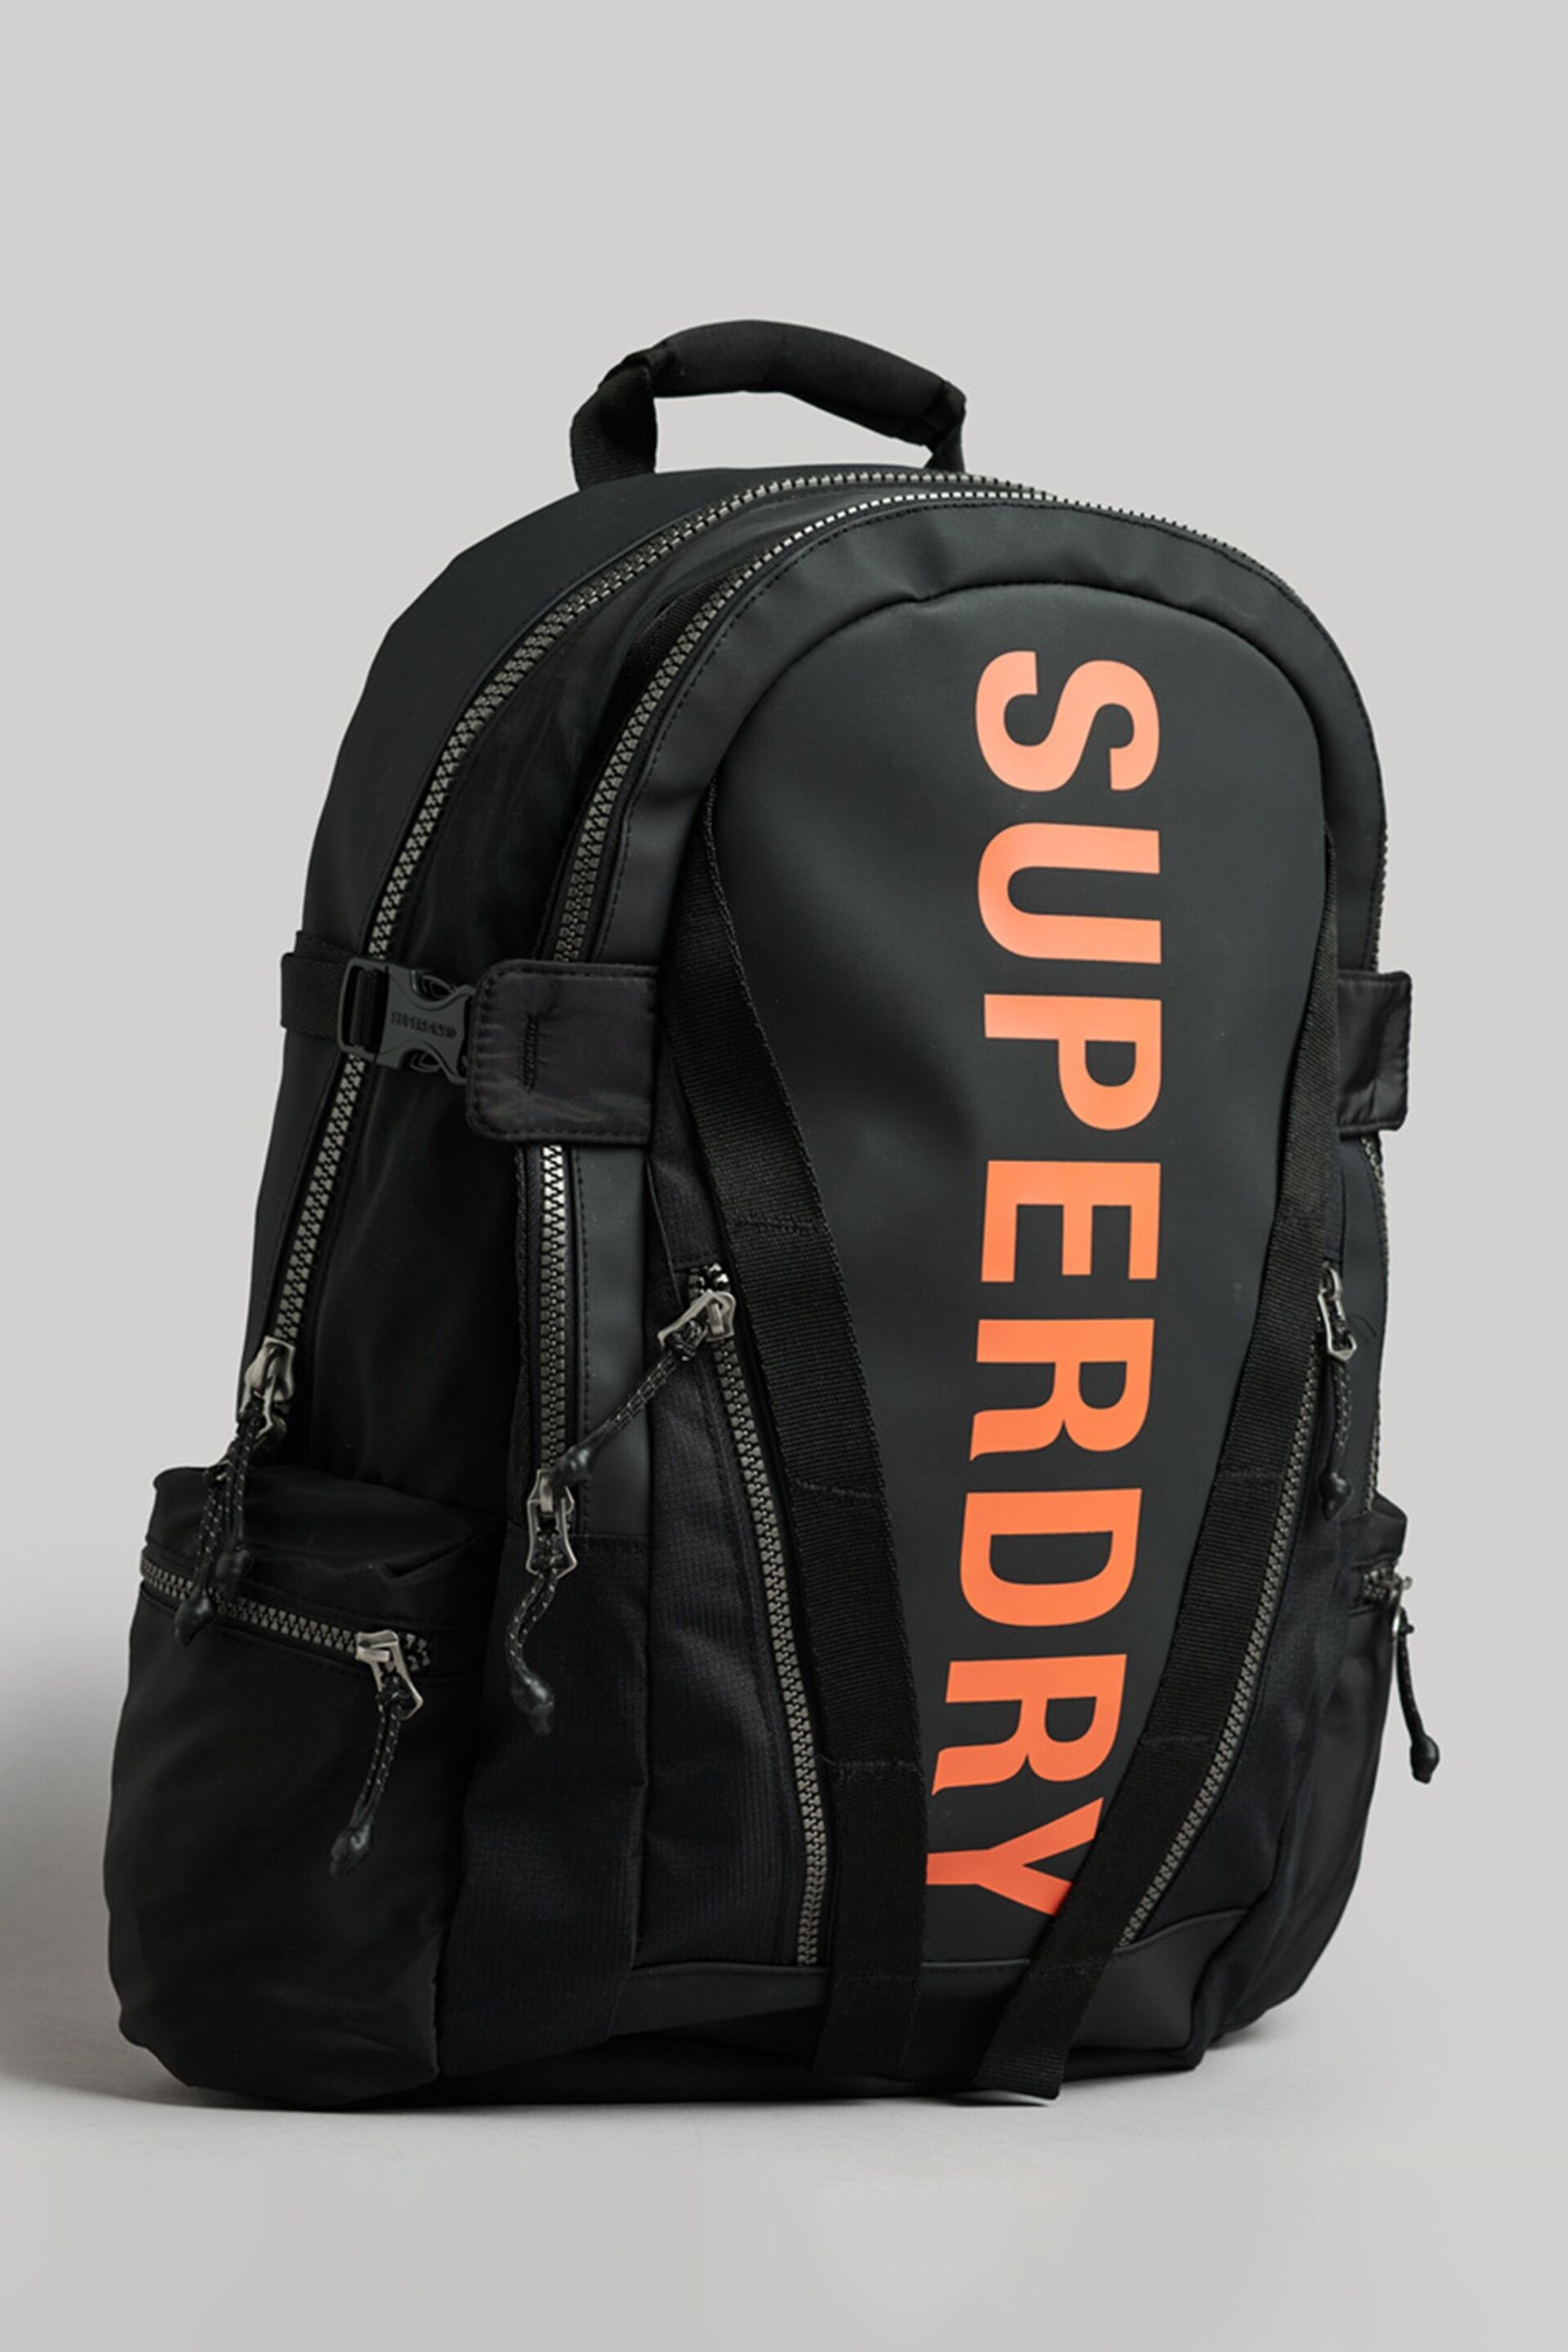 Superdry Black Mountain Tarp Graphic Backpack - Image 3 of 7